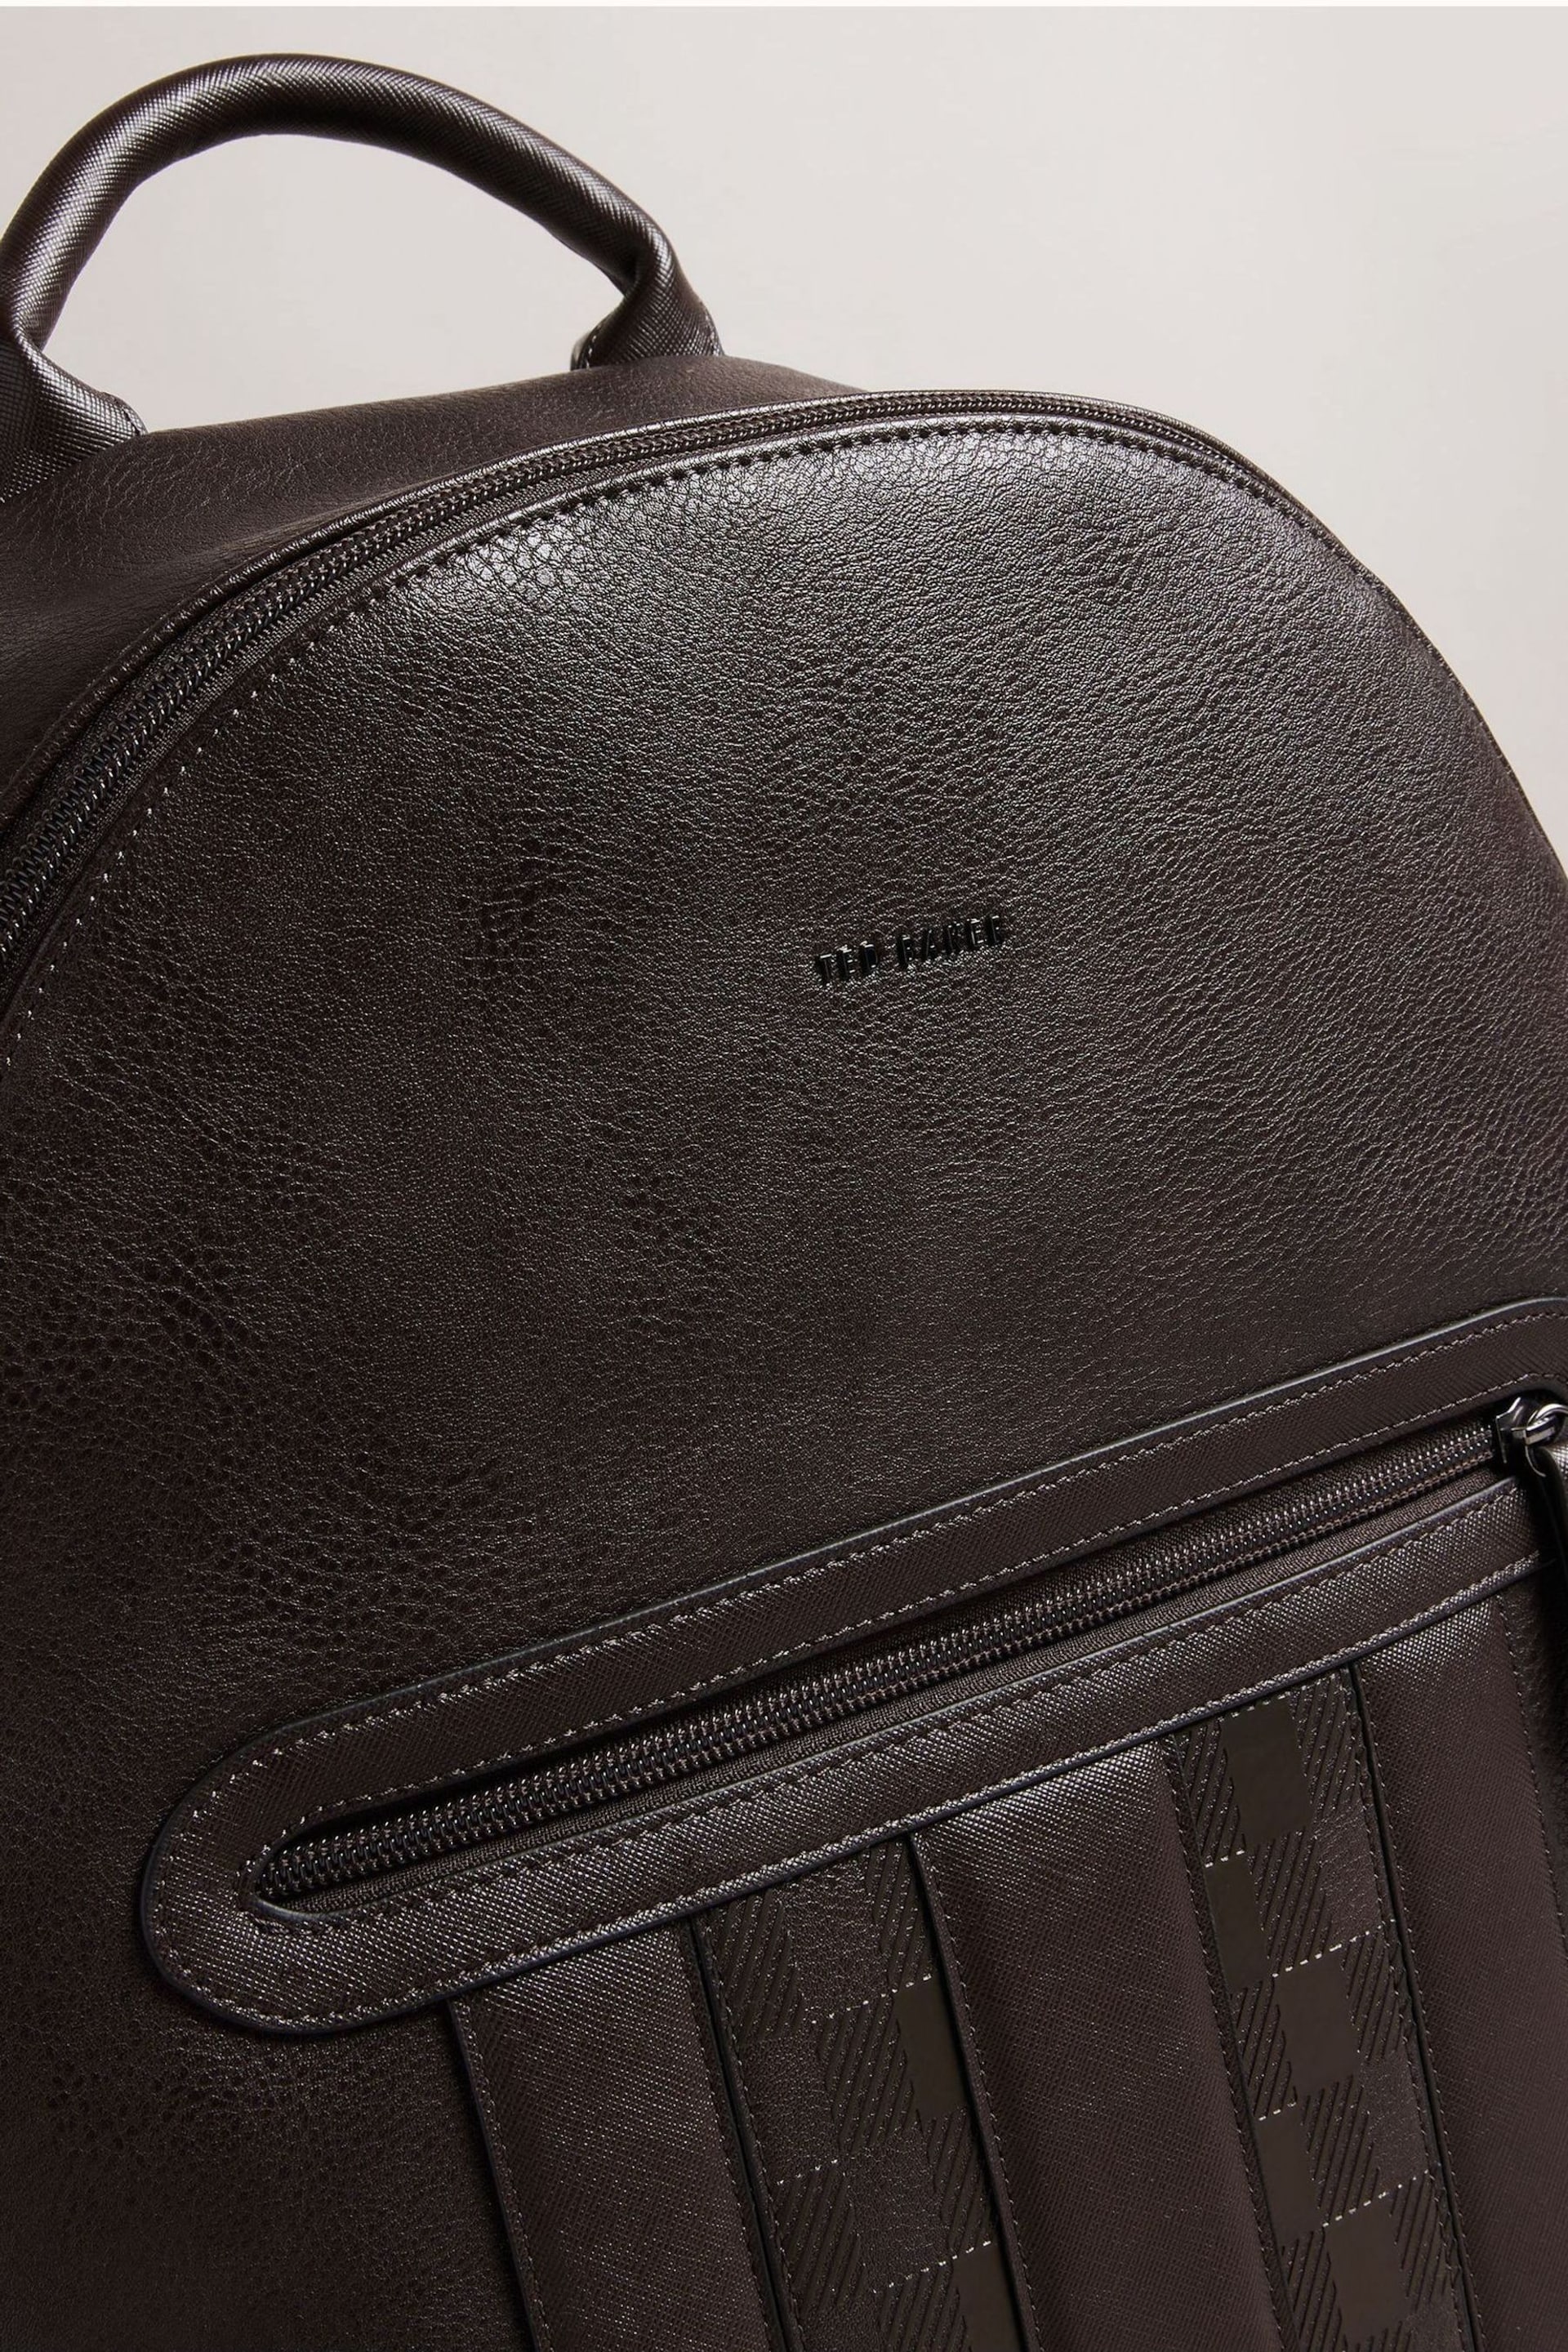 Ted Baker Brown Waynor House Check PU Backpack - Image 3 of 4